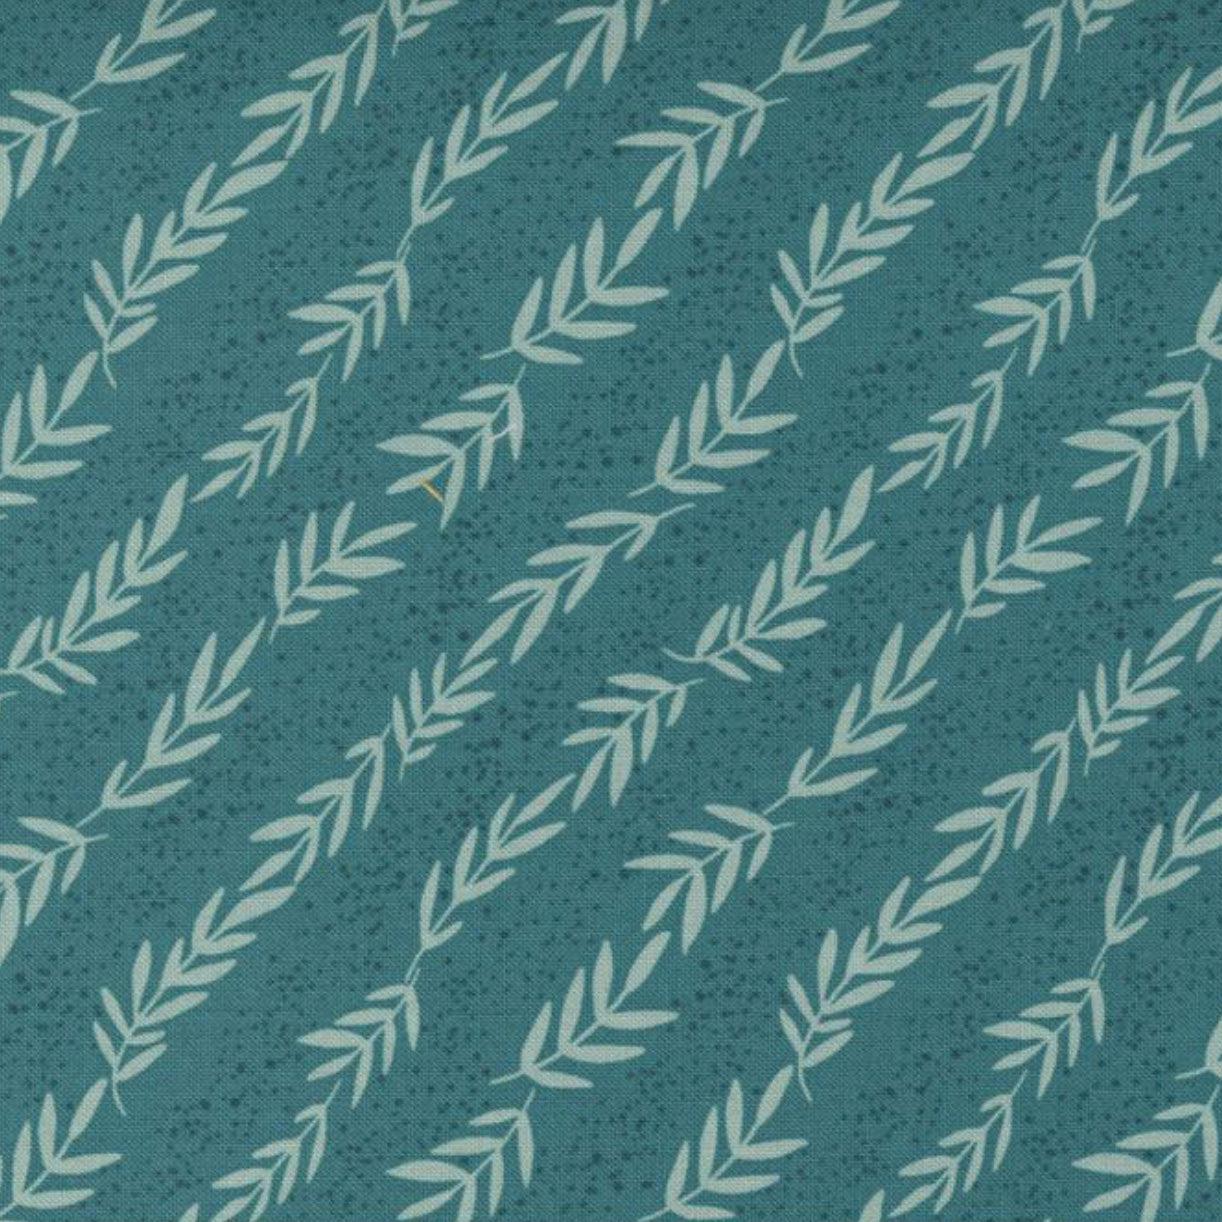 Songbook A New Page Dark Teal Reaching Stripes Leaf Fabric – End of Bolt – 22″ × 44/45″